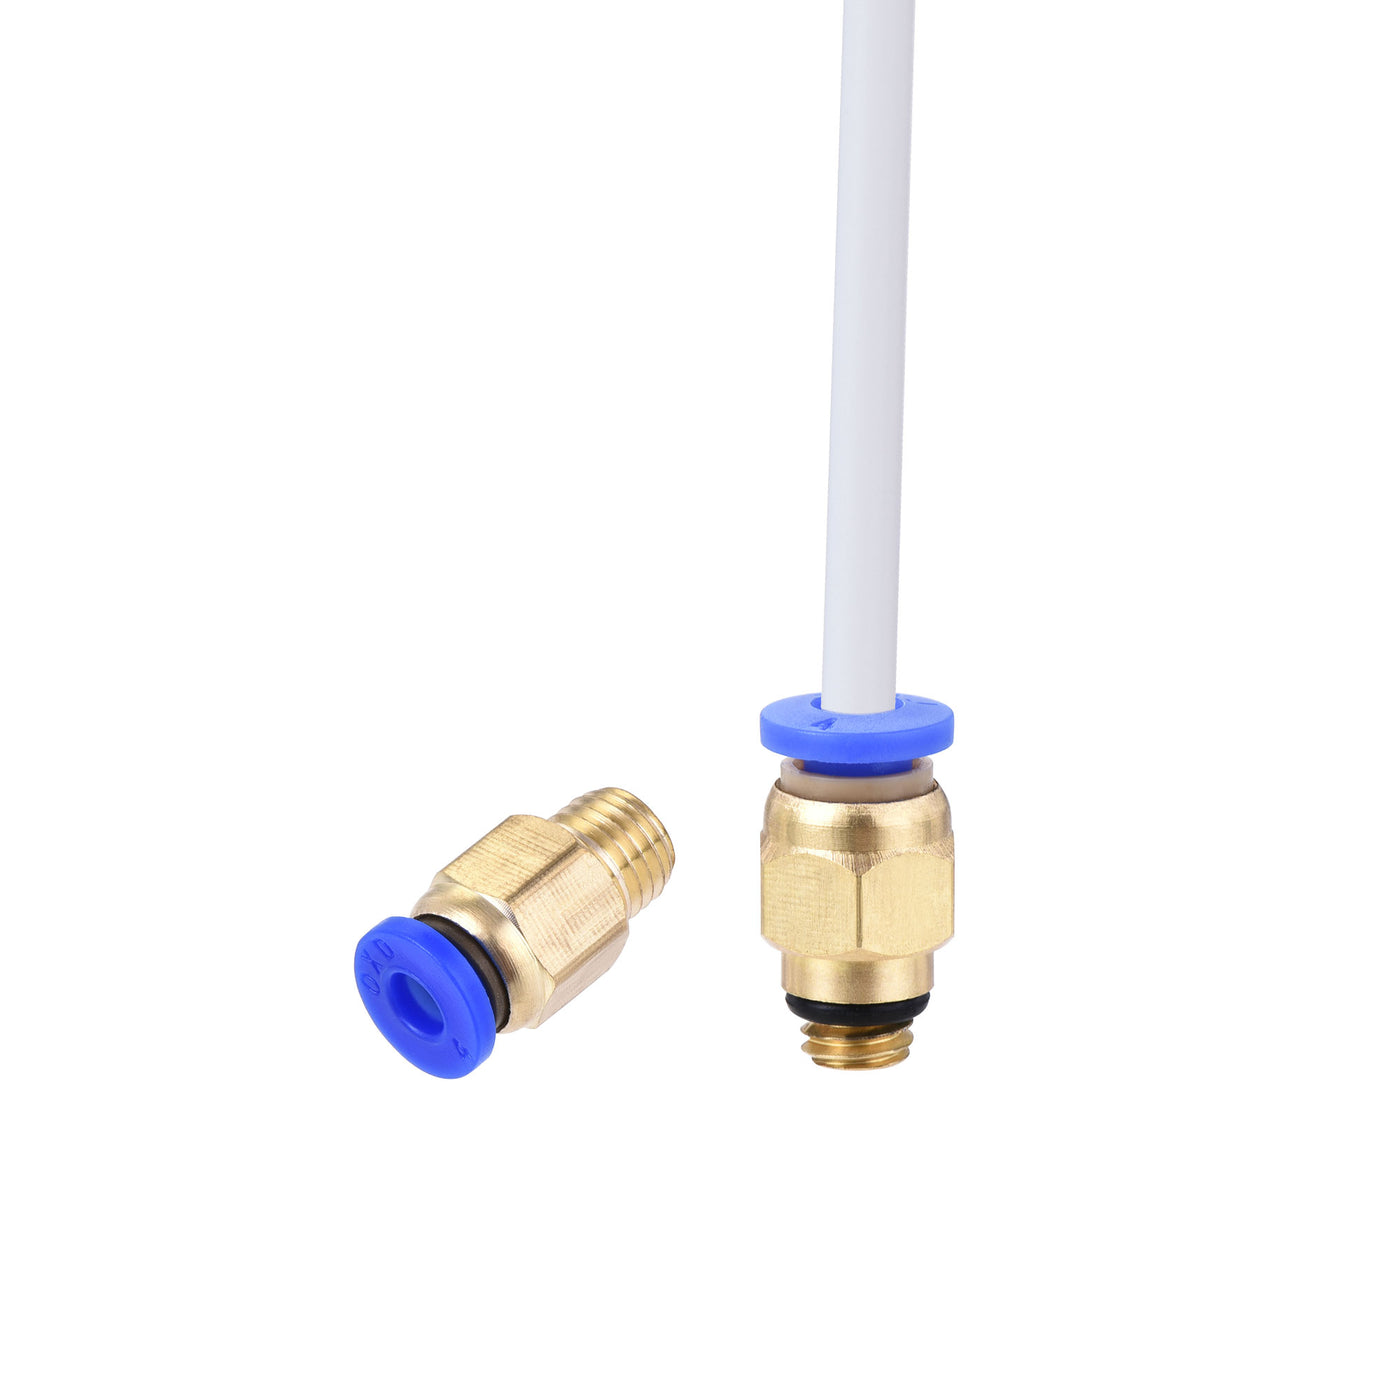 uxcell Uxcell Pneumatic PTFE Air Tubing Kit with M6 M8 Push to Connect Fittings for Air Hose Line Pipe 4mm OD 4M White